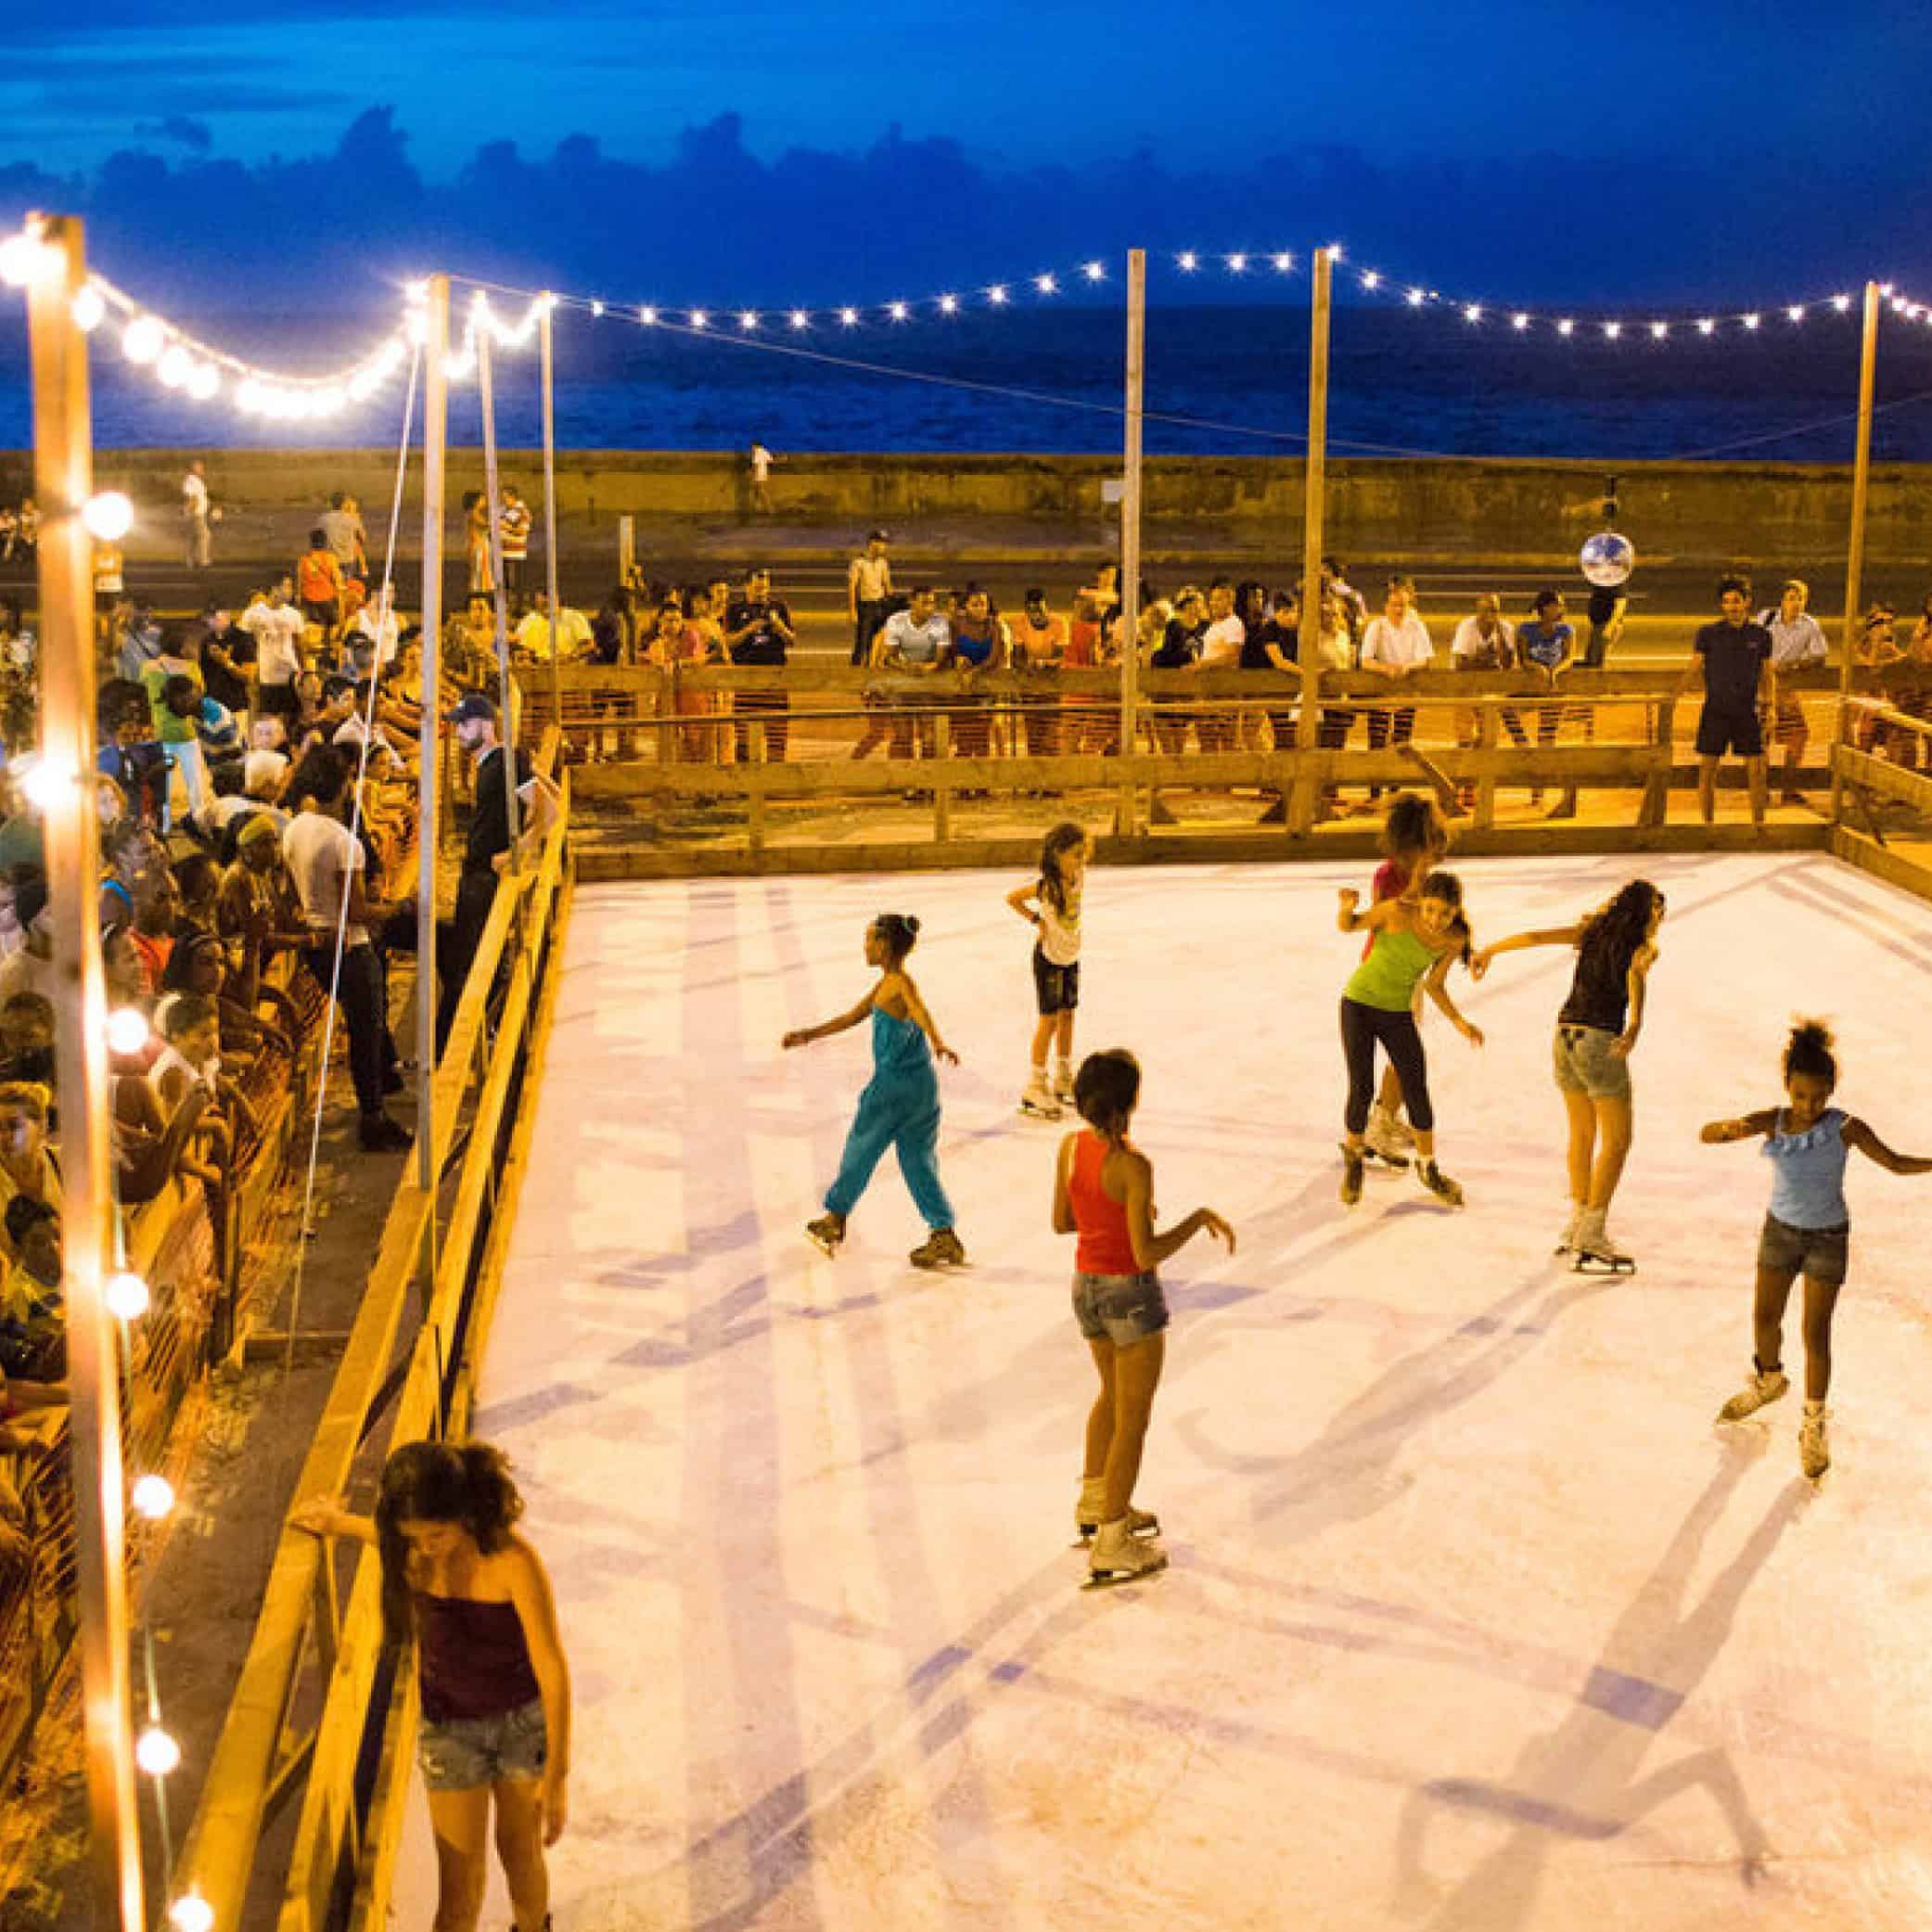 Ice skating rink with a group of people